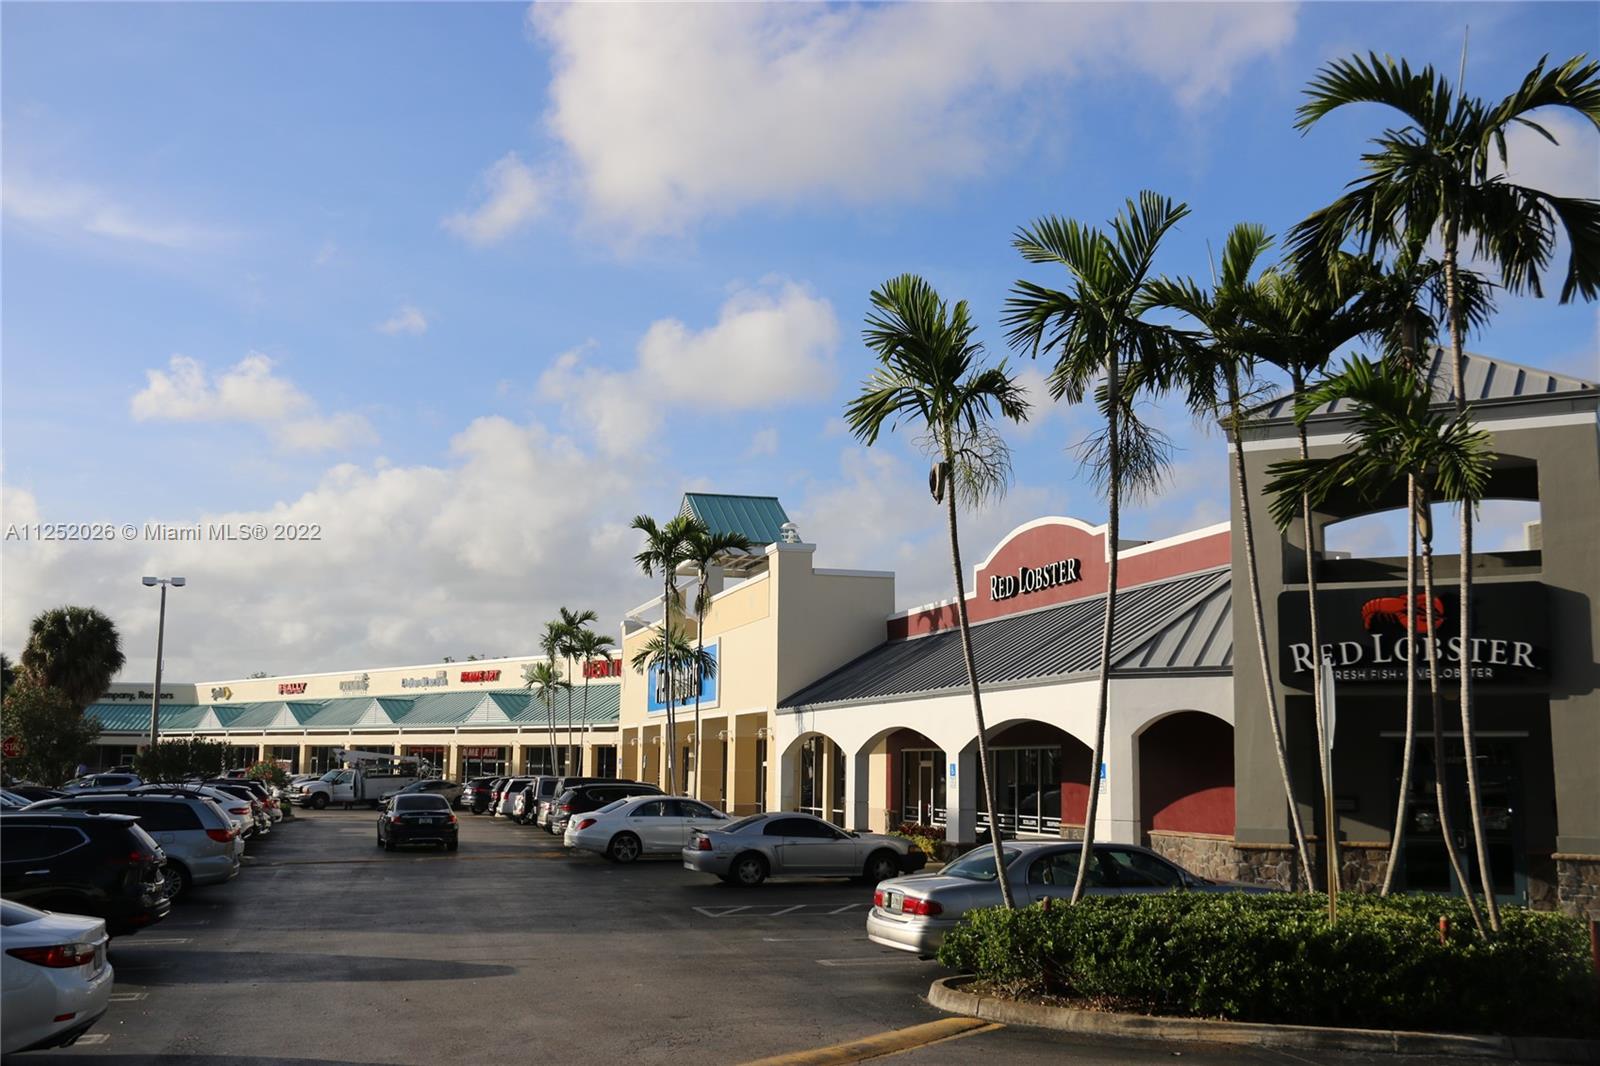 • Directly across from the upscale Falls Mall, anchored by Fresh Market, Apple and Shake Shack
• Abundant parking
• Join the following tenants: TJ-Maxx, Sally Beauty Supply, Crafty Crab, Crumbl and Baptist Health South Florida
• Located in the mature and affluent Pinecrest/Palmetto Bay/Falls Florida communities